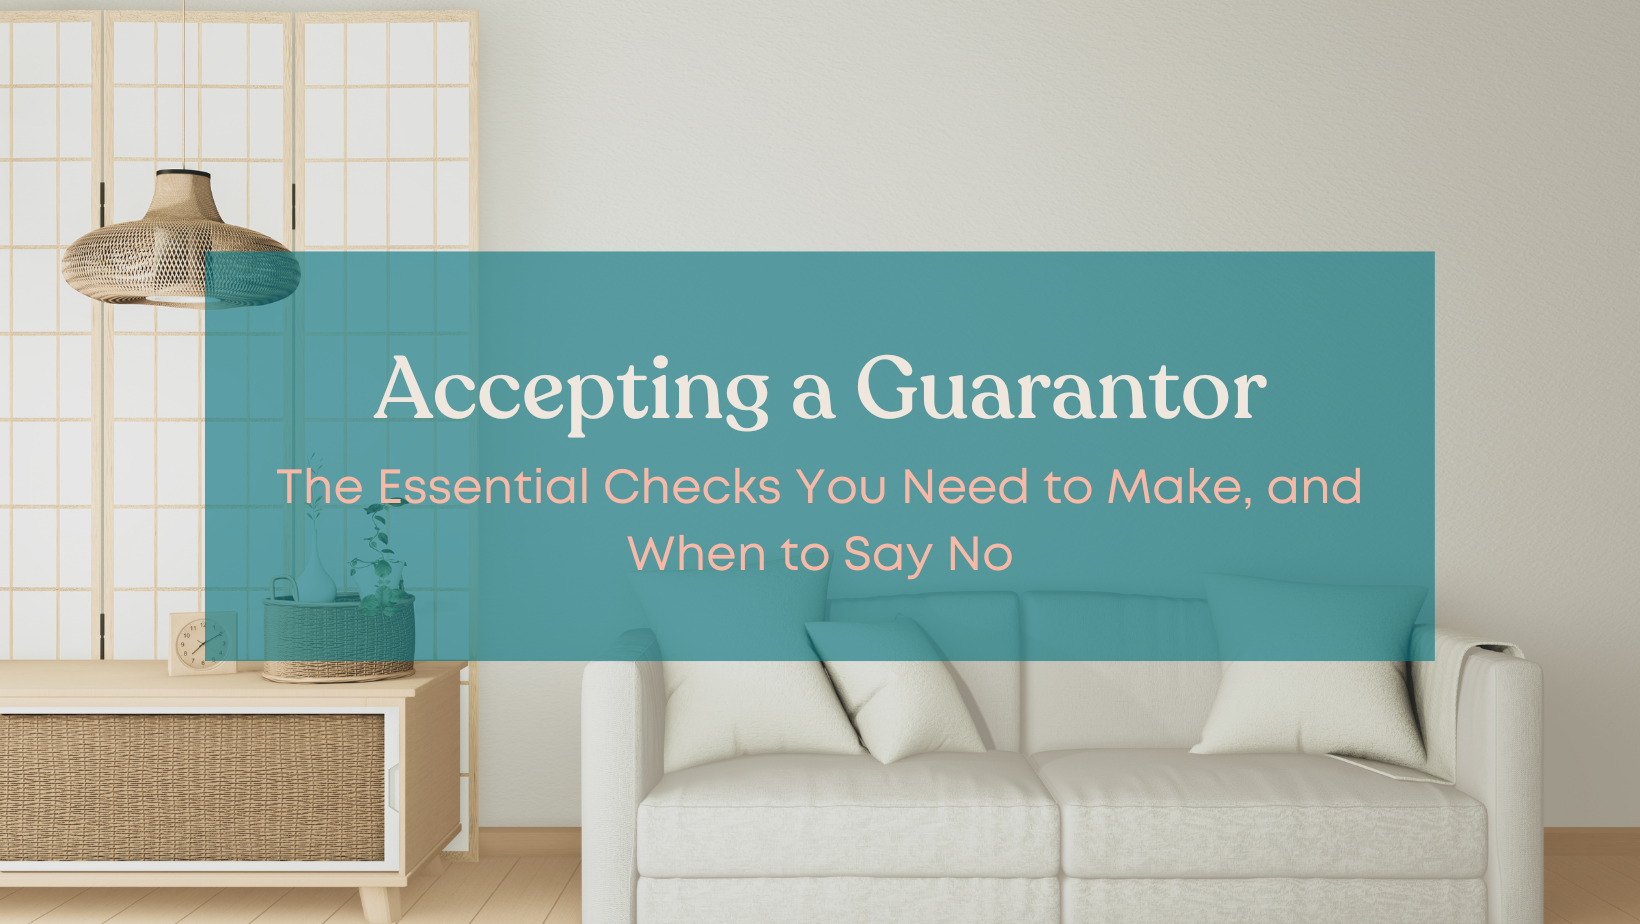 essential checks to make, and when to say no